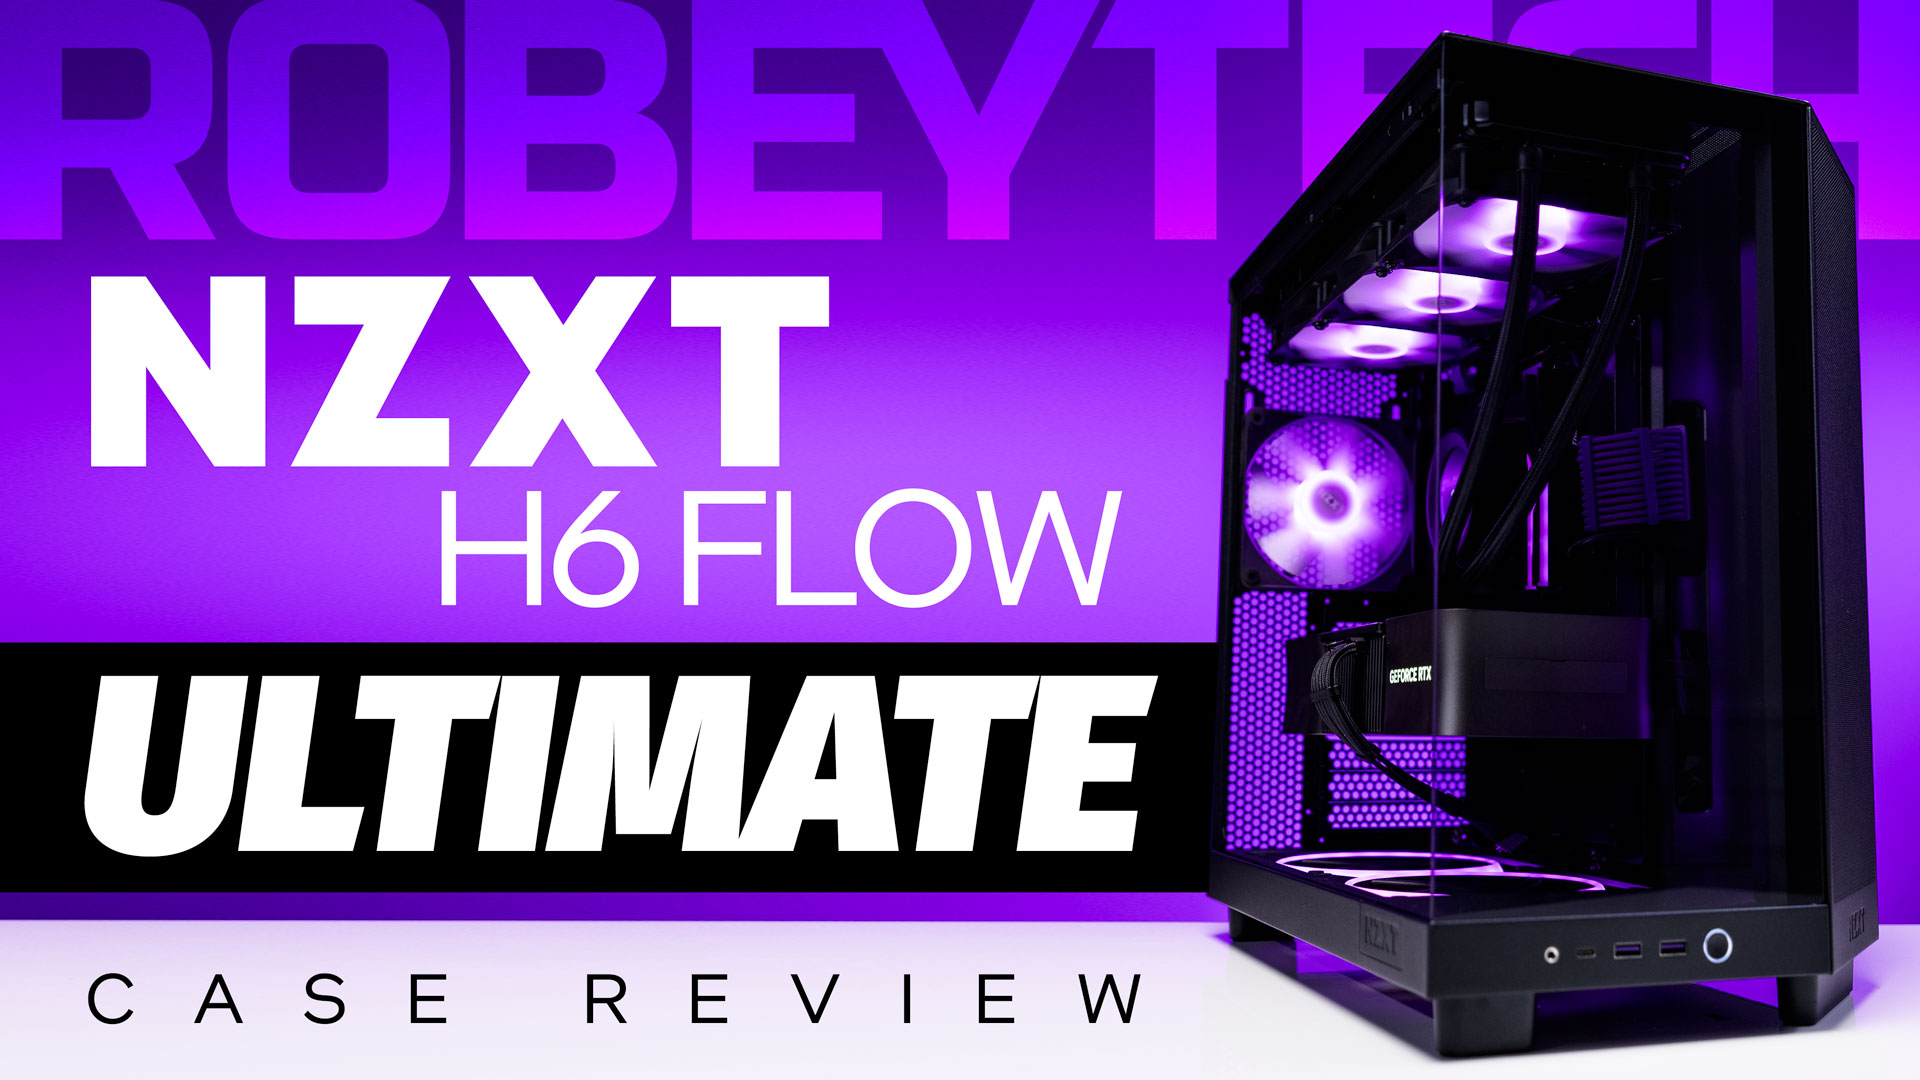 Robeytech on X: This case had the best Thermal Performance of any case we  had tested this year and it's from NZXT! Check out our full review of  the brand new @NZXT